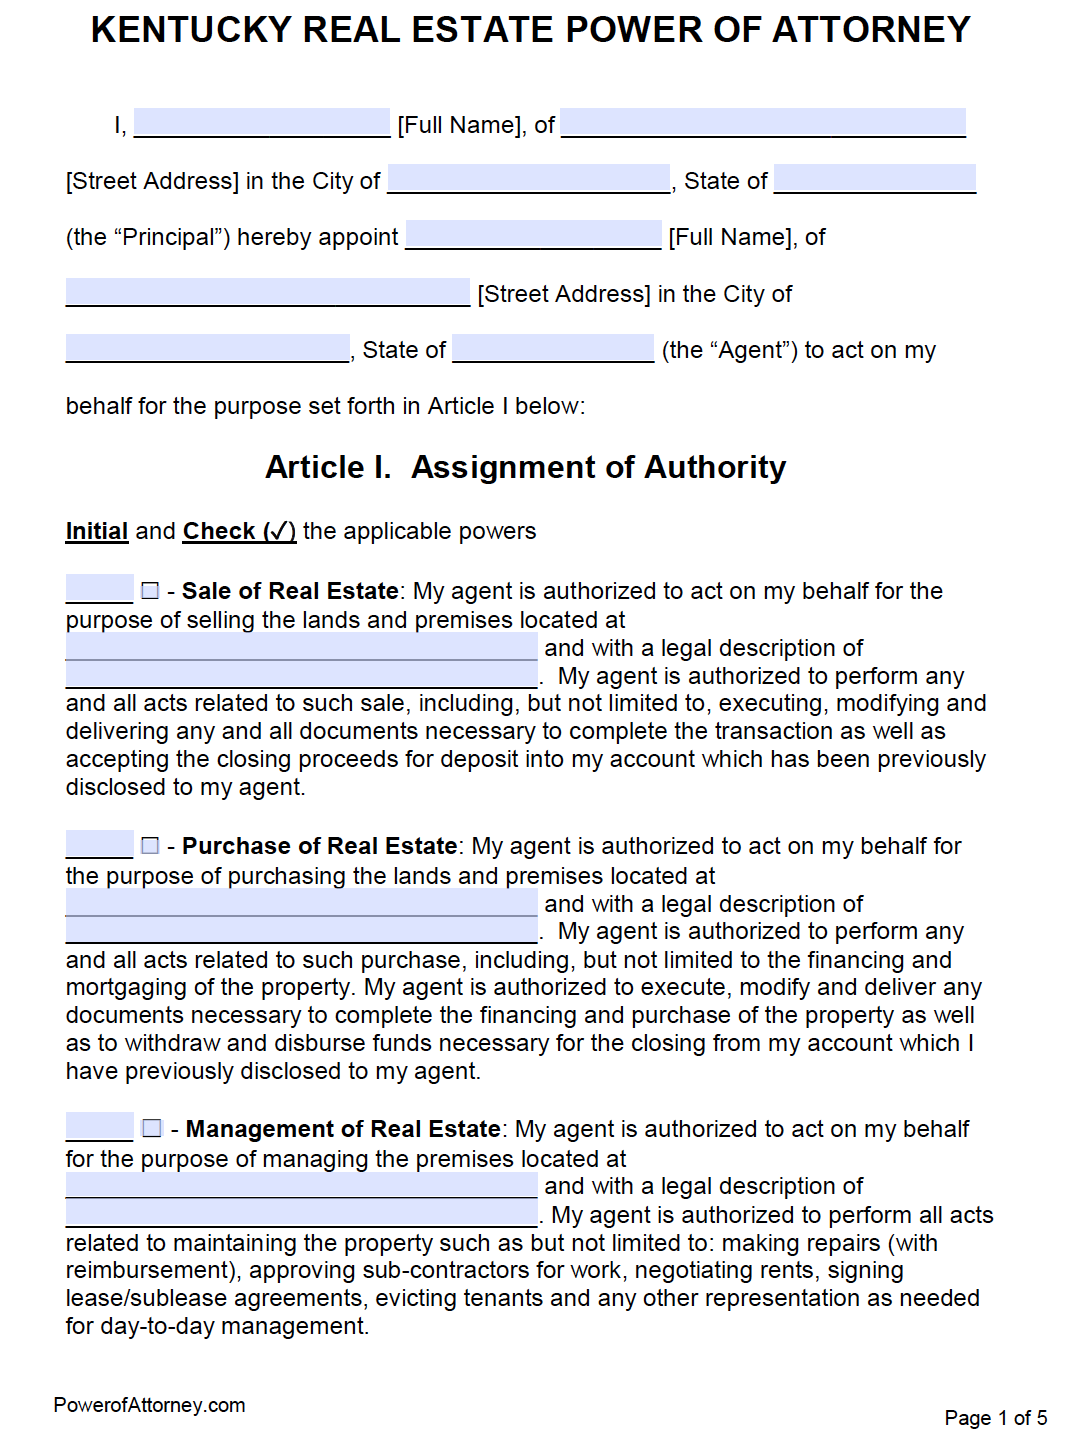 free kentucky power of attorney forms pdf templates